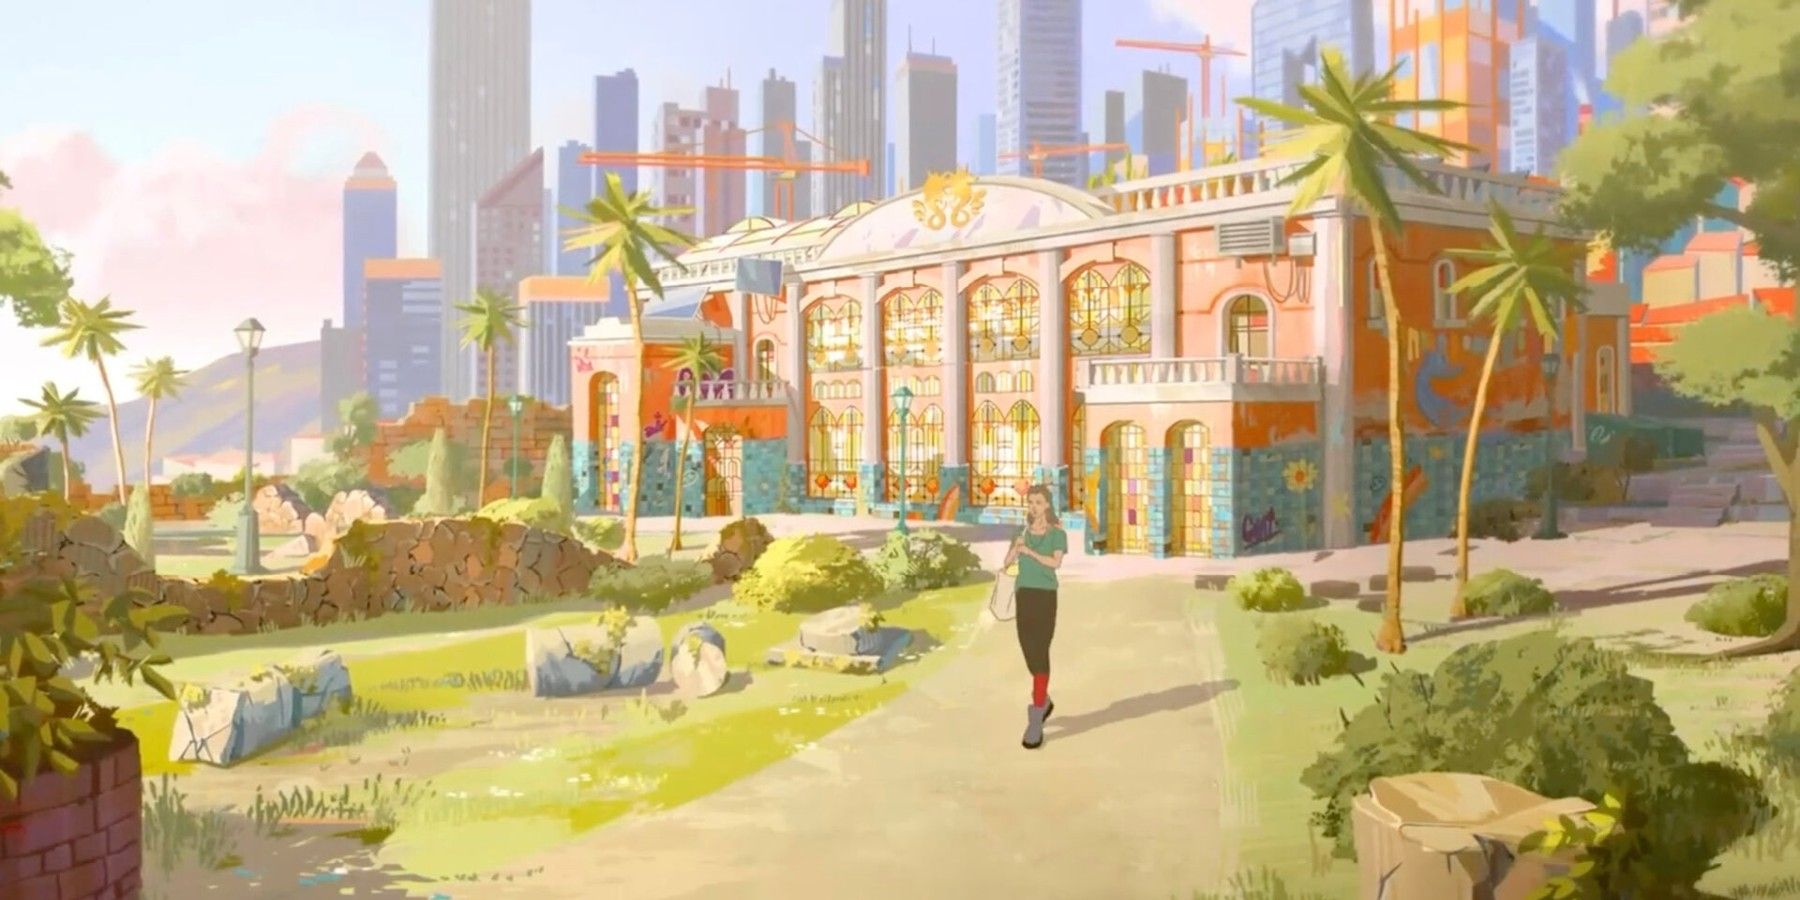 The protagonist walks along a path in the sun with a cityscape in the background